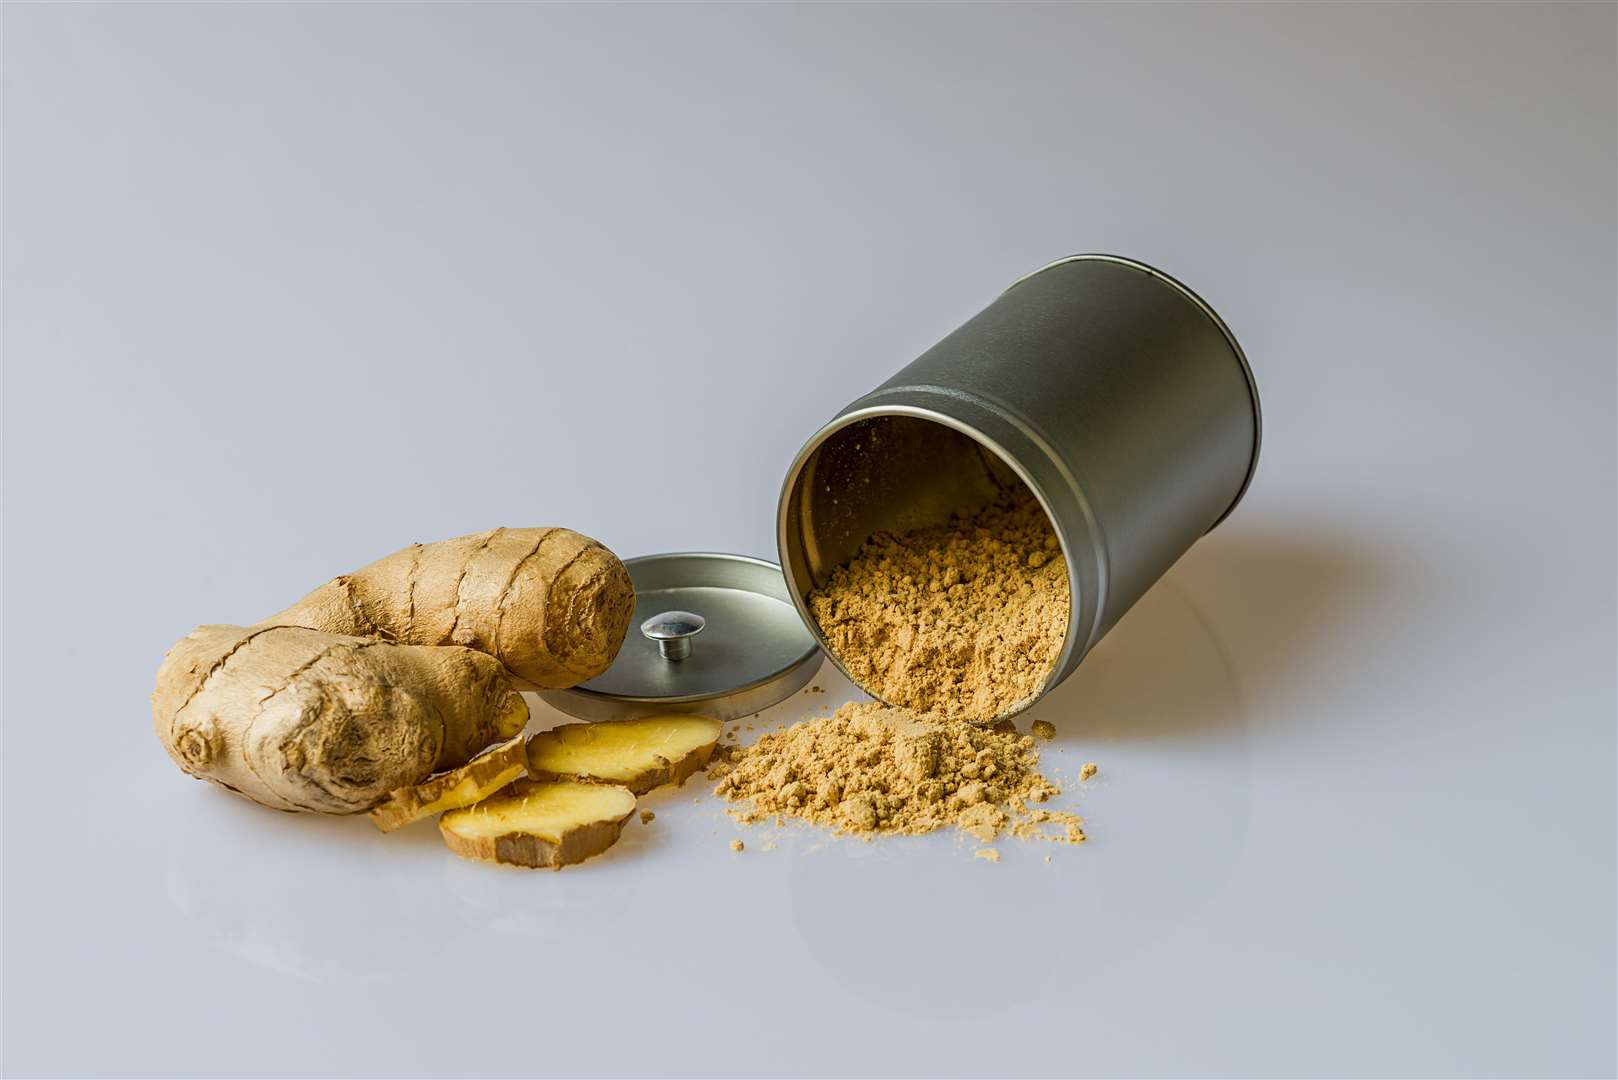 Ginger has a wide variety of uses around the world.